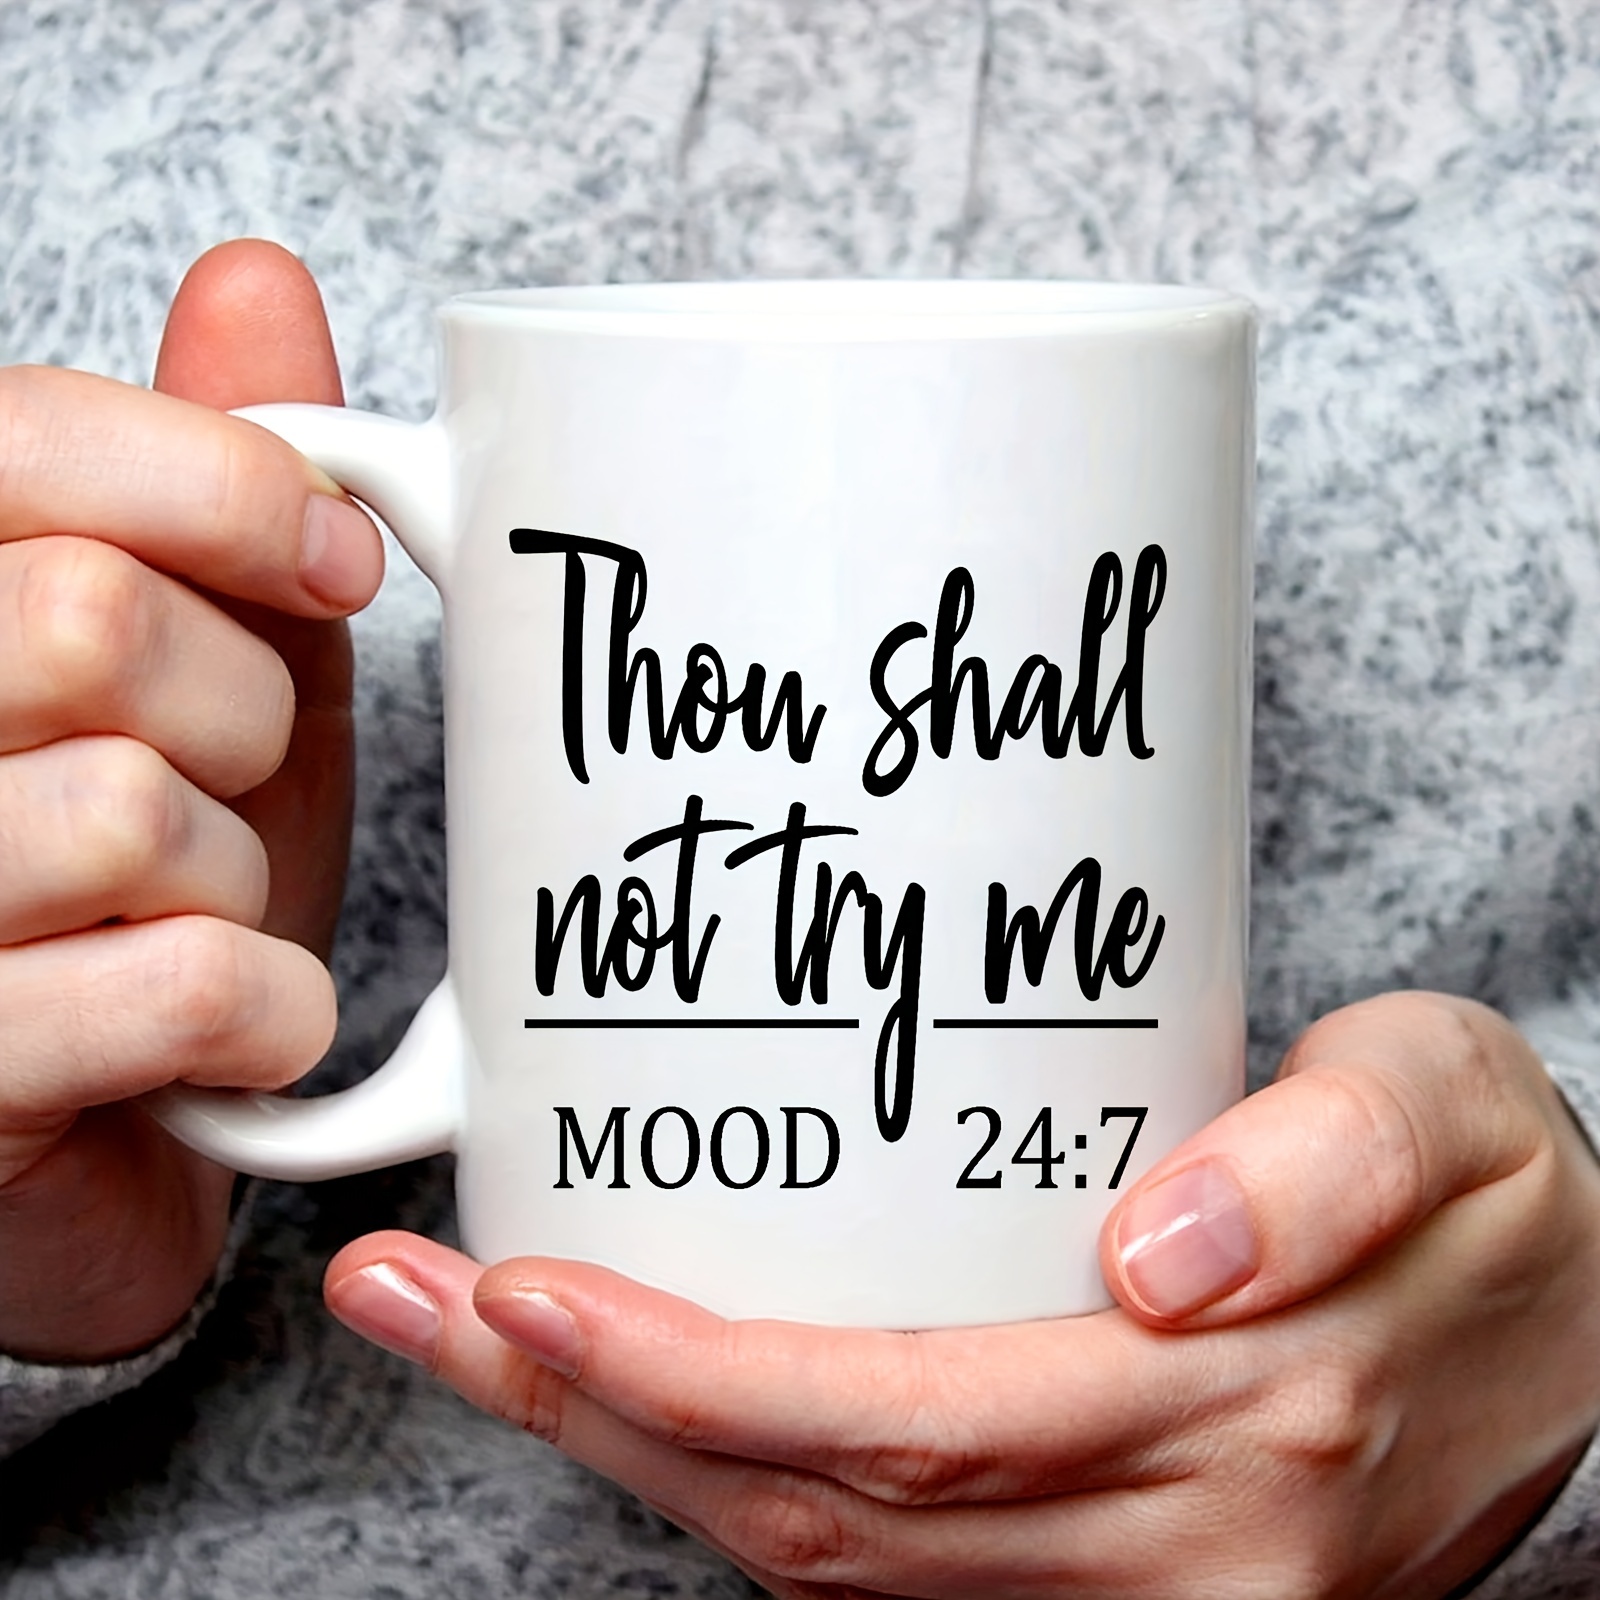 For Ladies - Coffee Mugs – The Best Funny Gifts#1